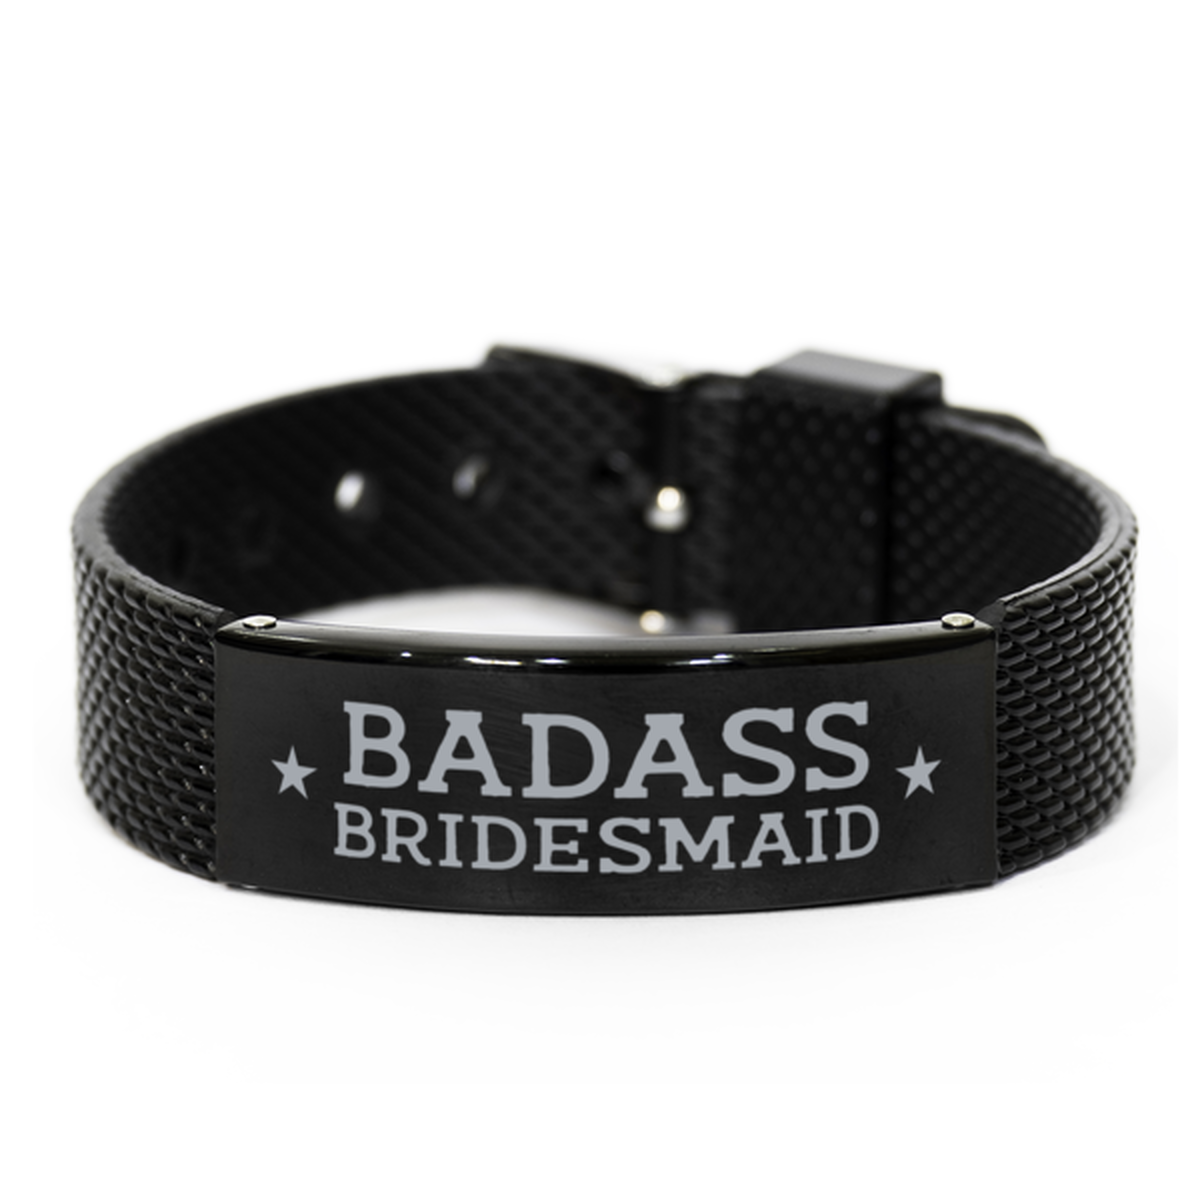 Bridemaid Black Shark Mesh Bracelet, Badass Bridemaid, Funny Family Gifts For Bridemaid From Bride